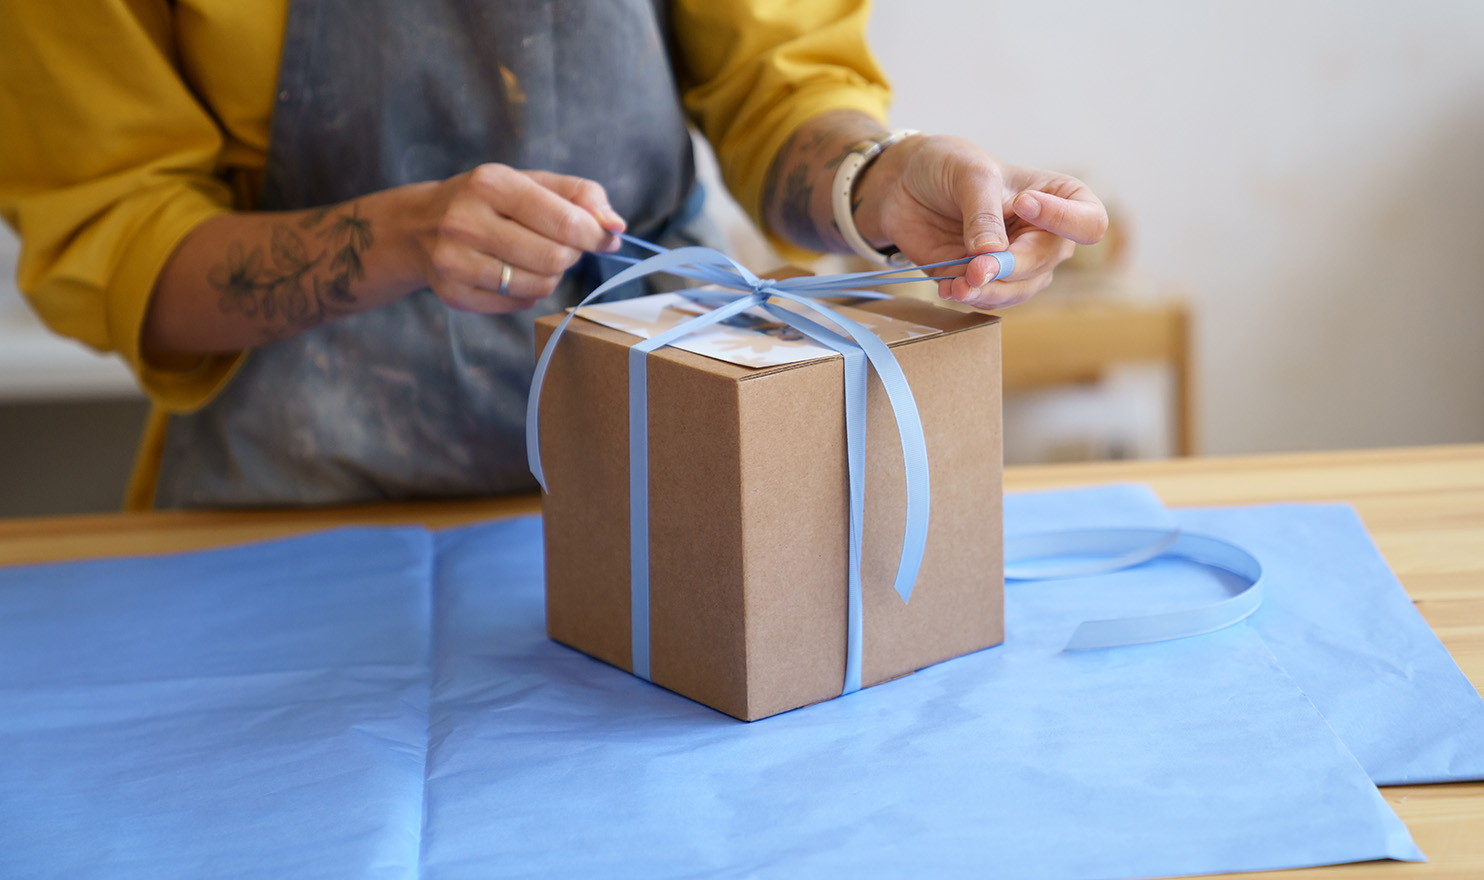 An artist is packaging an order and tying a blue ribbon around a box.